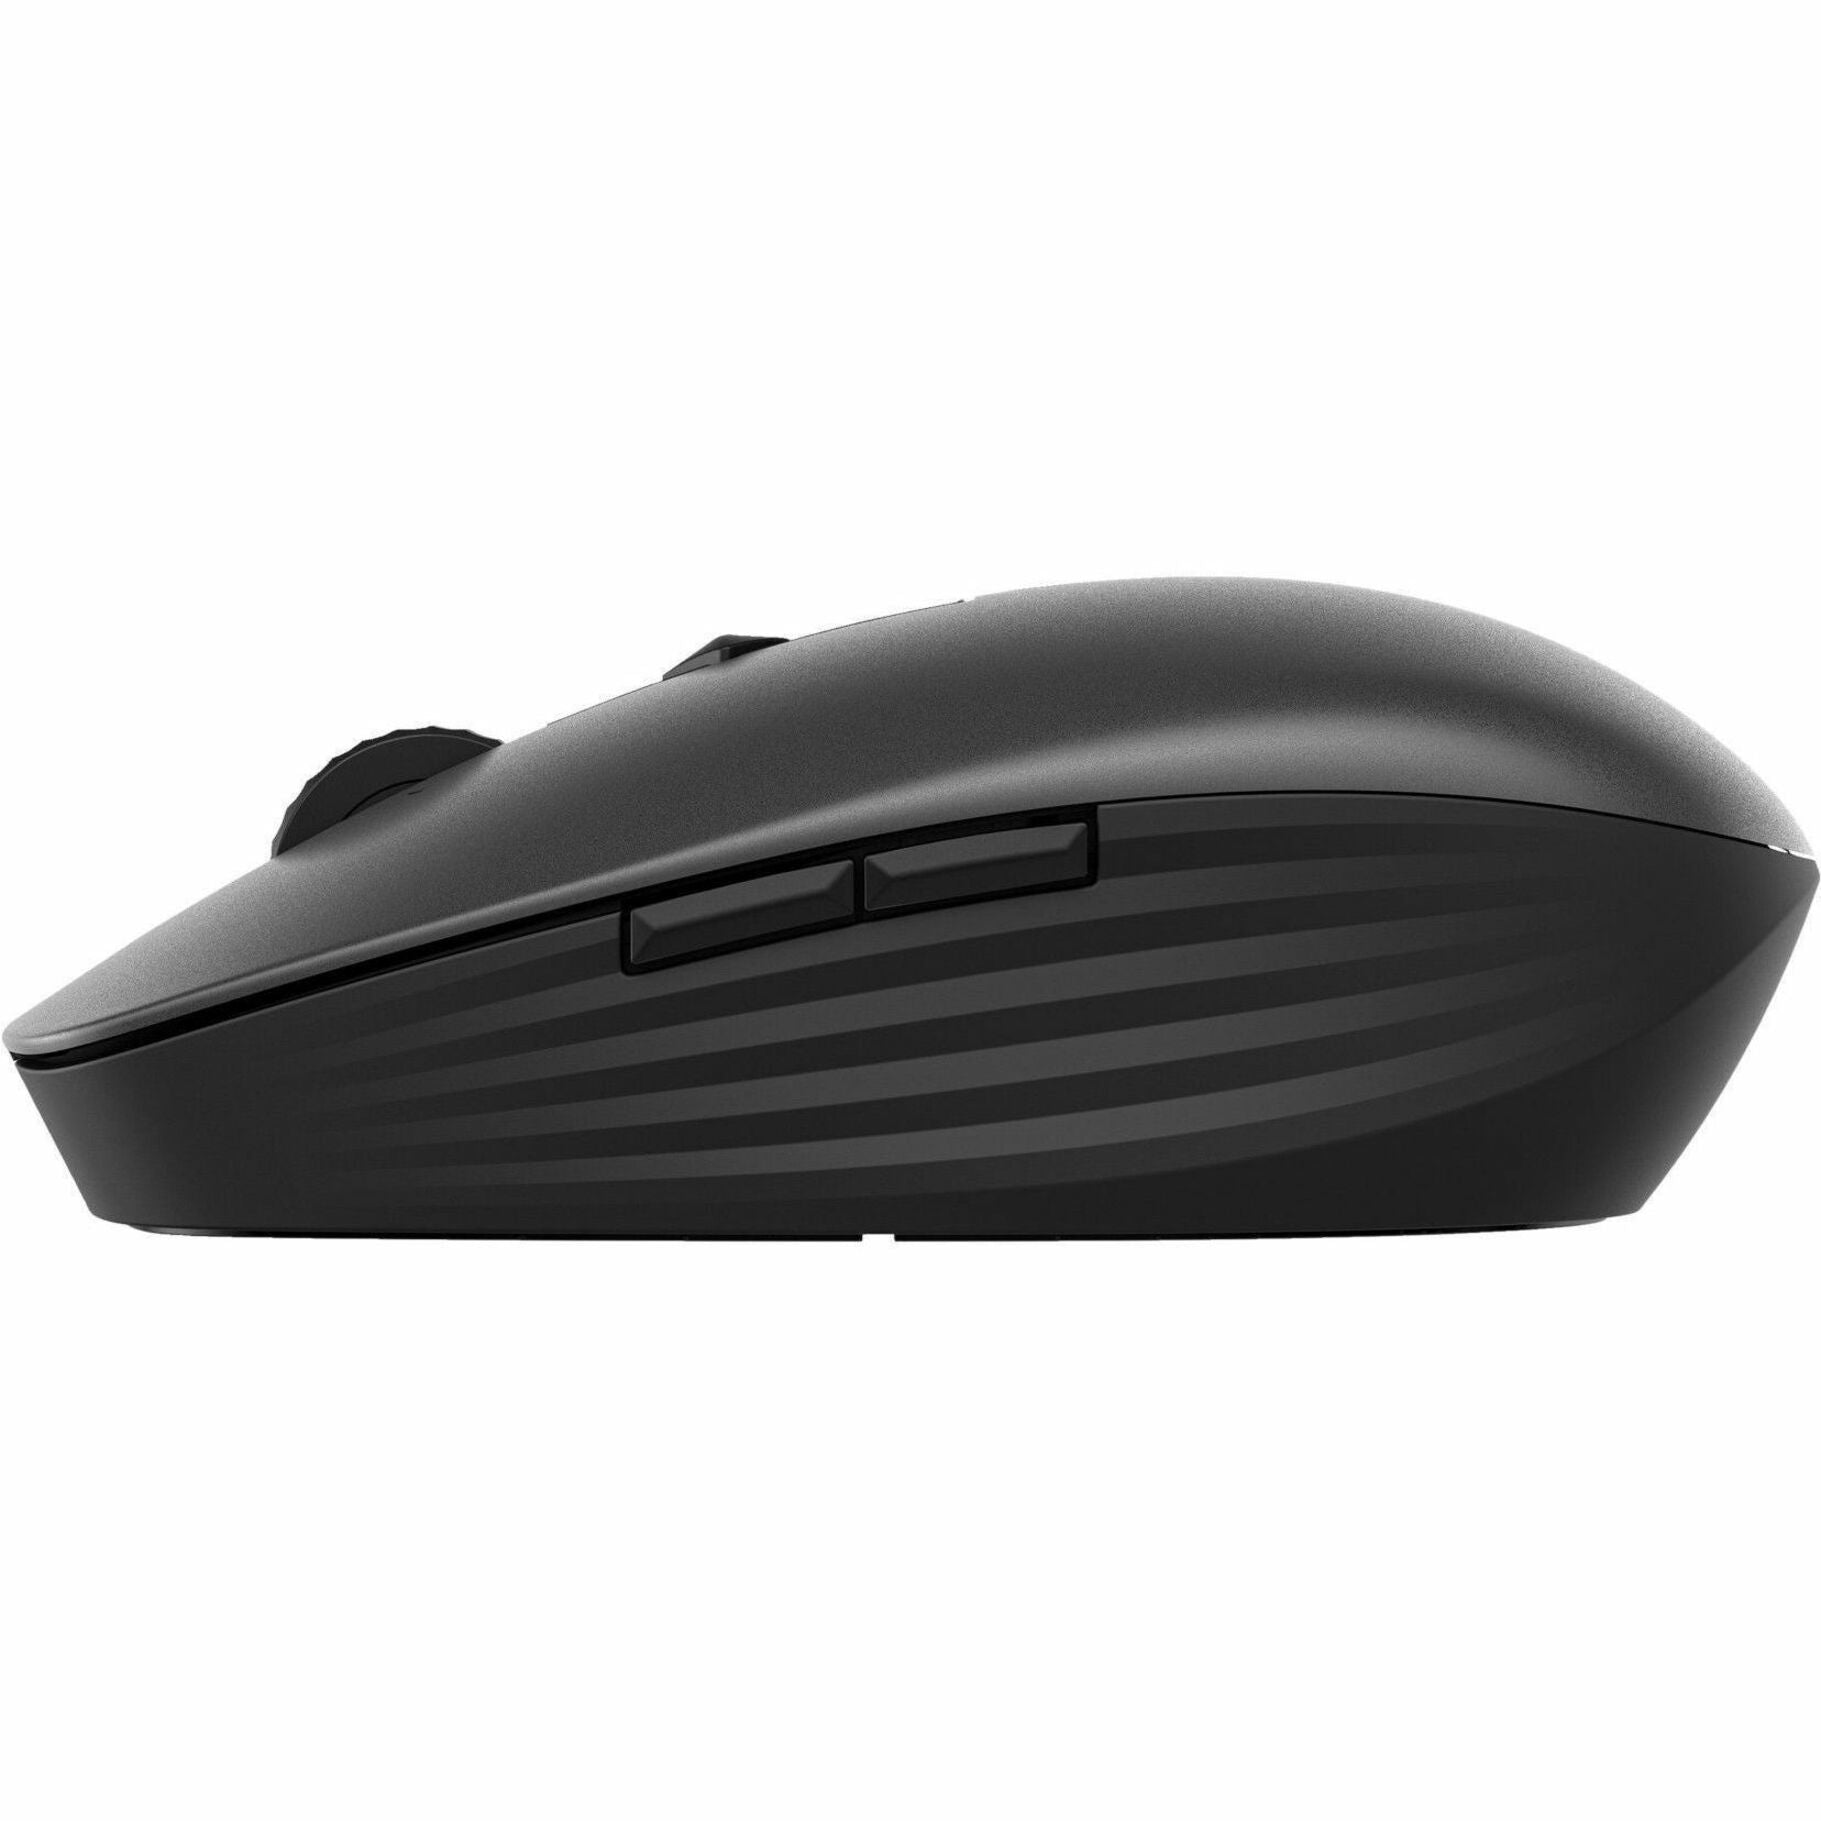 HP 6E6F2AA#ABL 710 Rechargeable Silent Mouse, Ergonomic Fit, Tilt Wheel, Track-On-Glass, 3000 dpi